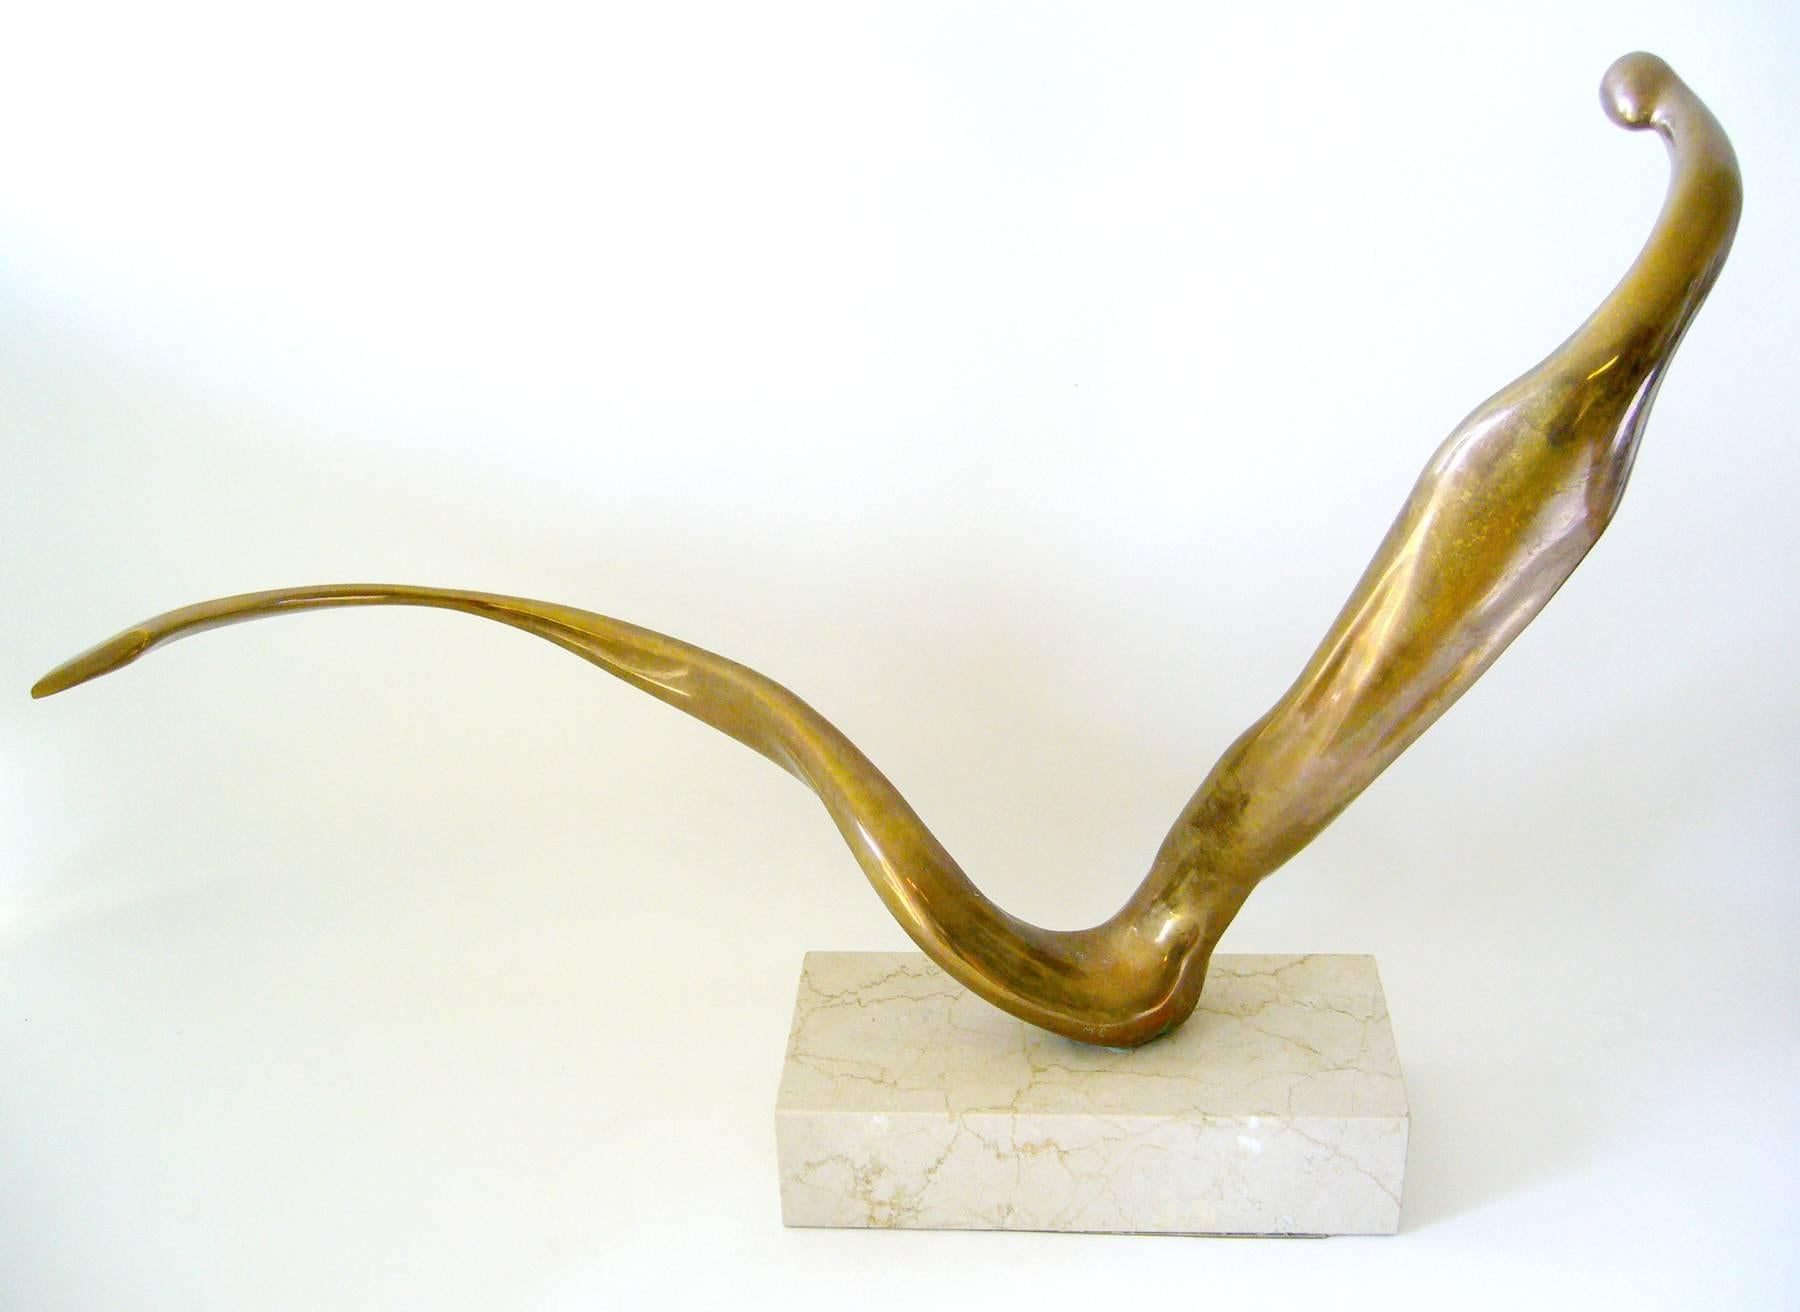 Elongated, abstract figural bronze on marble base created by Cuban listed artist, Manuel Carbonell. Sculpture measures 23